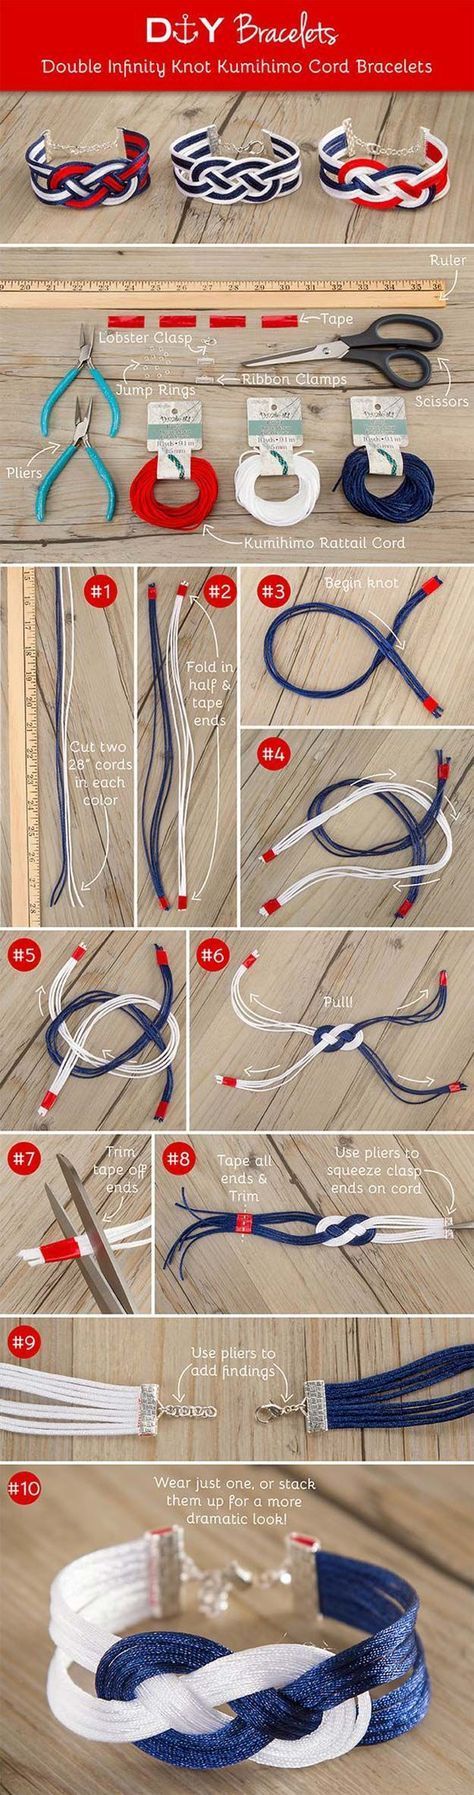 Crafts to Make and Sell – Double Infinity Knot Bracelet – Easy Step by Step Tutorials for Fun, Cool and Creative Ways for